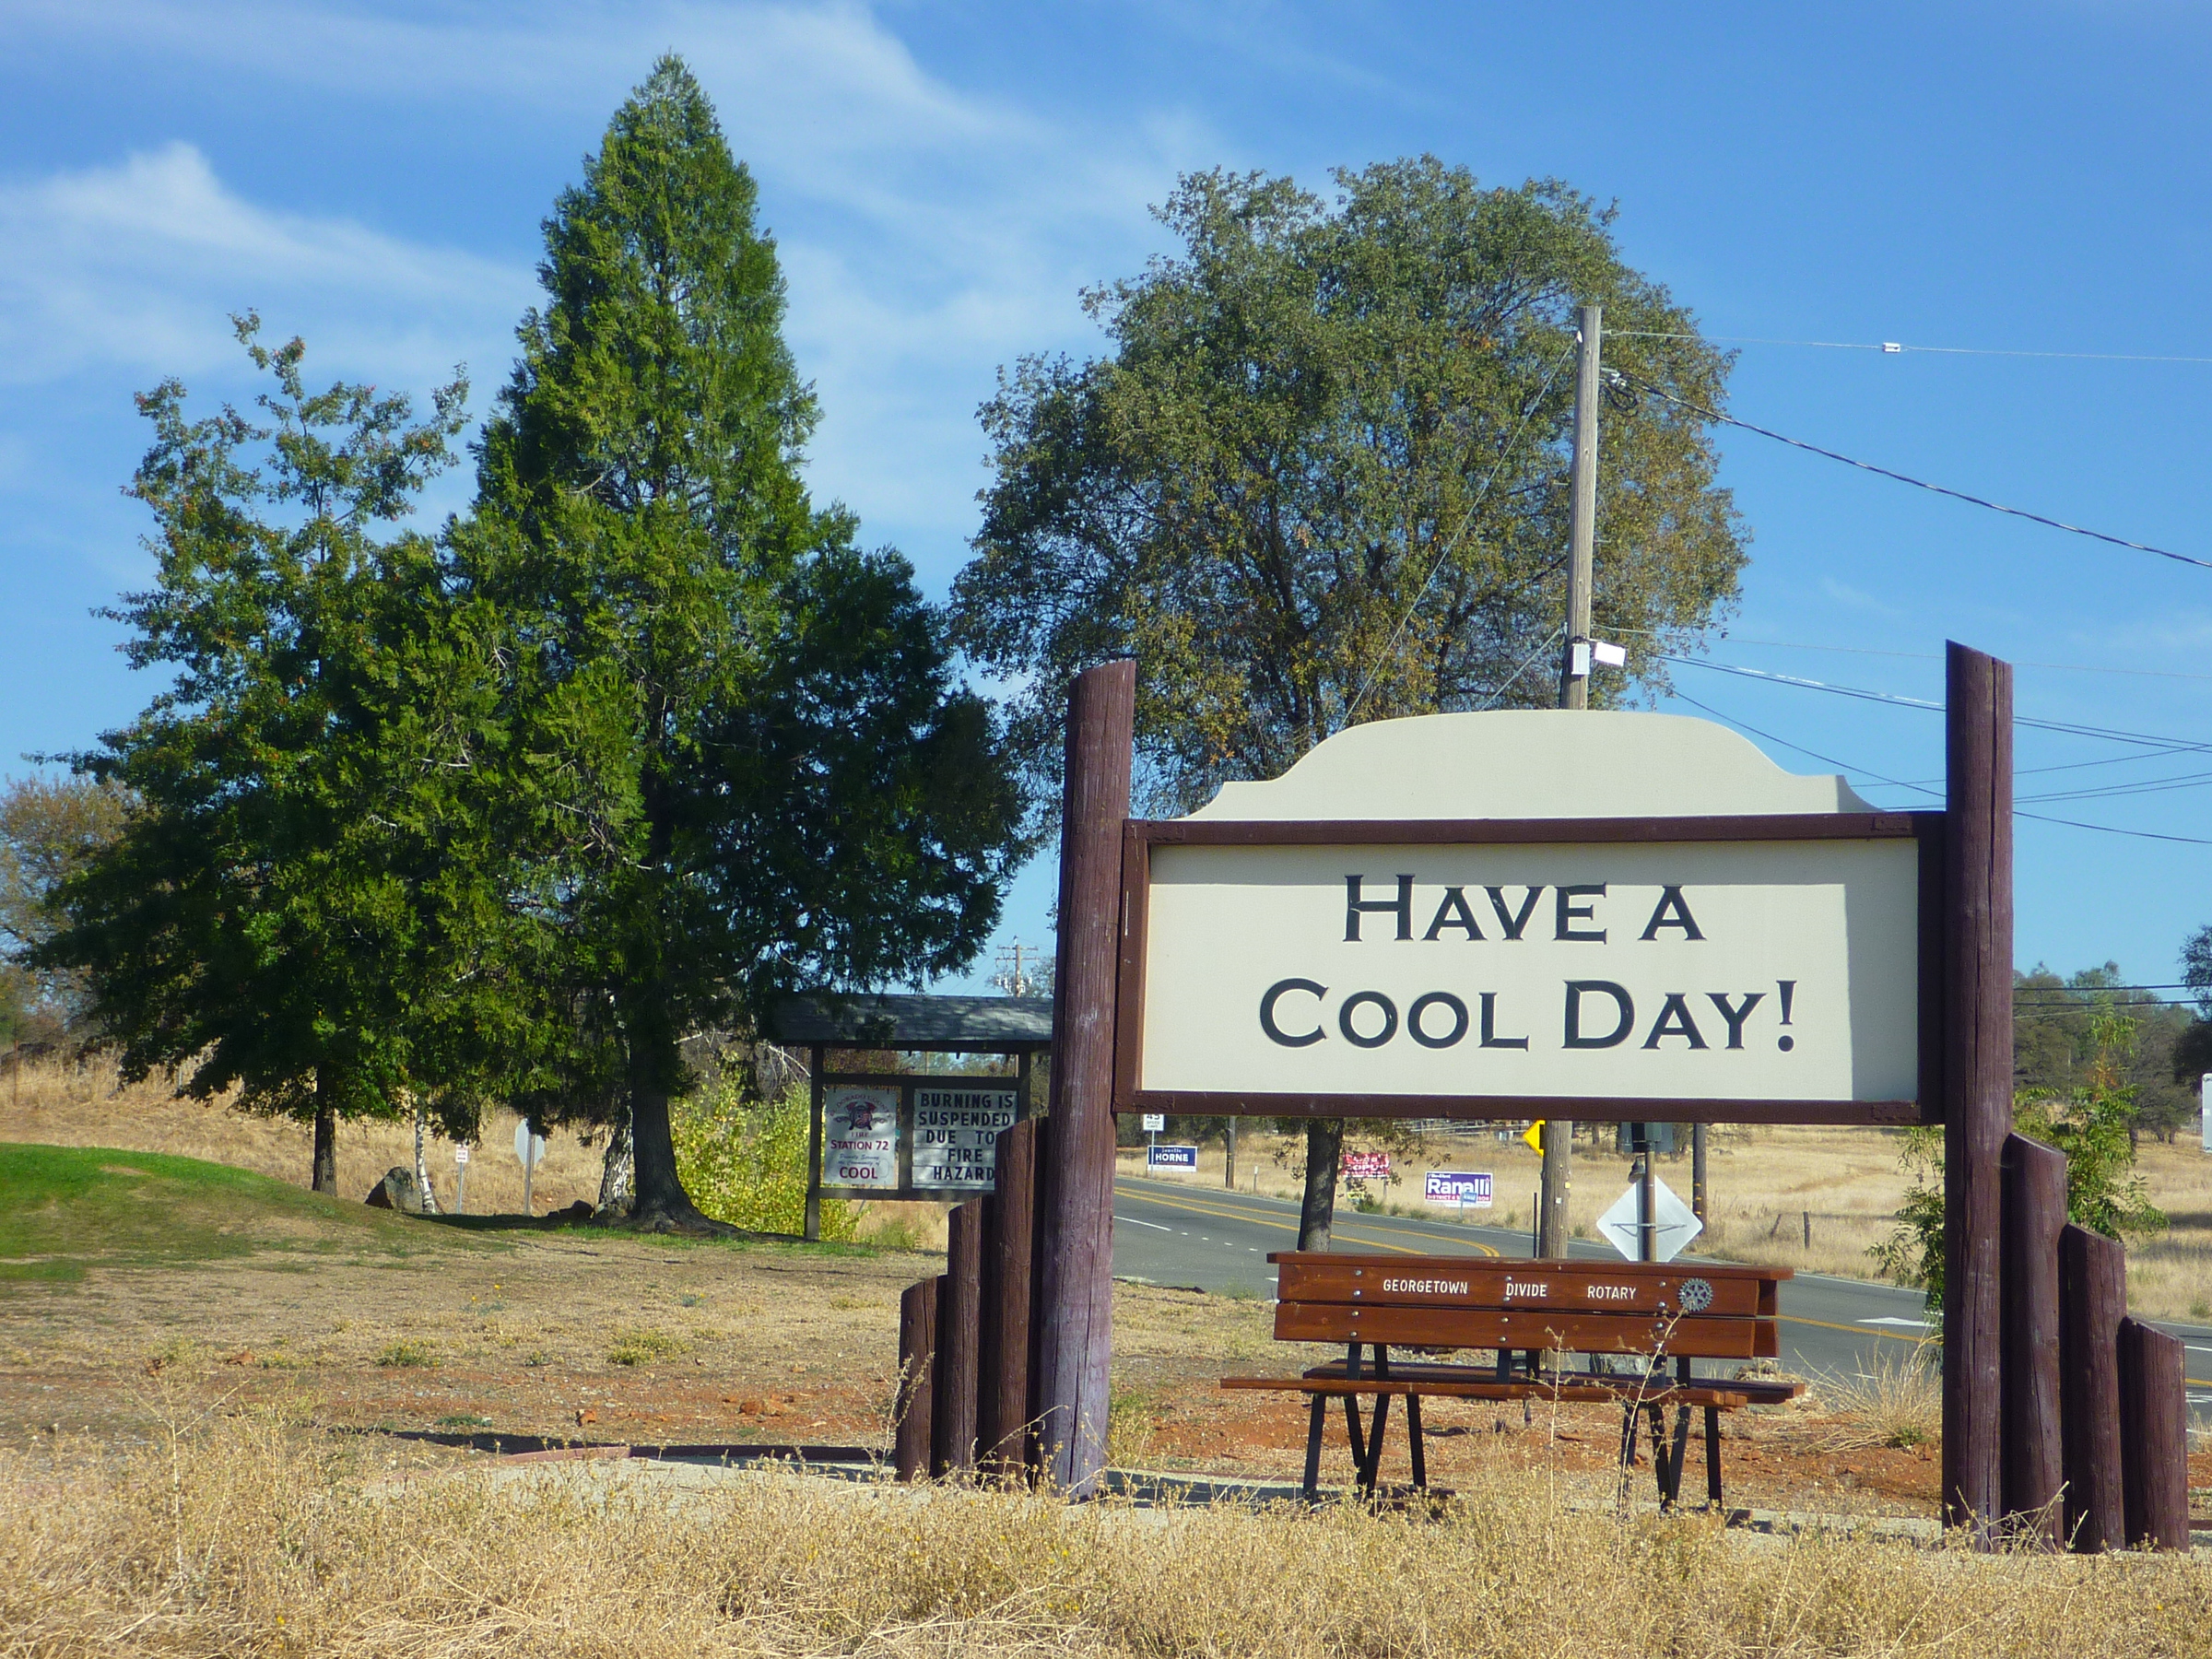 Have a cool day!